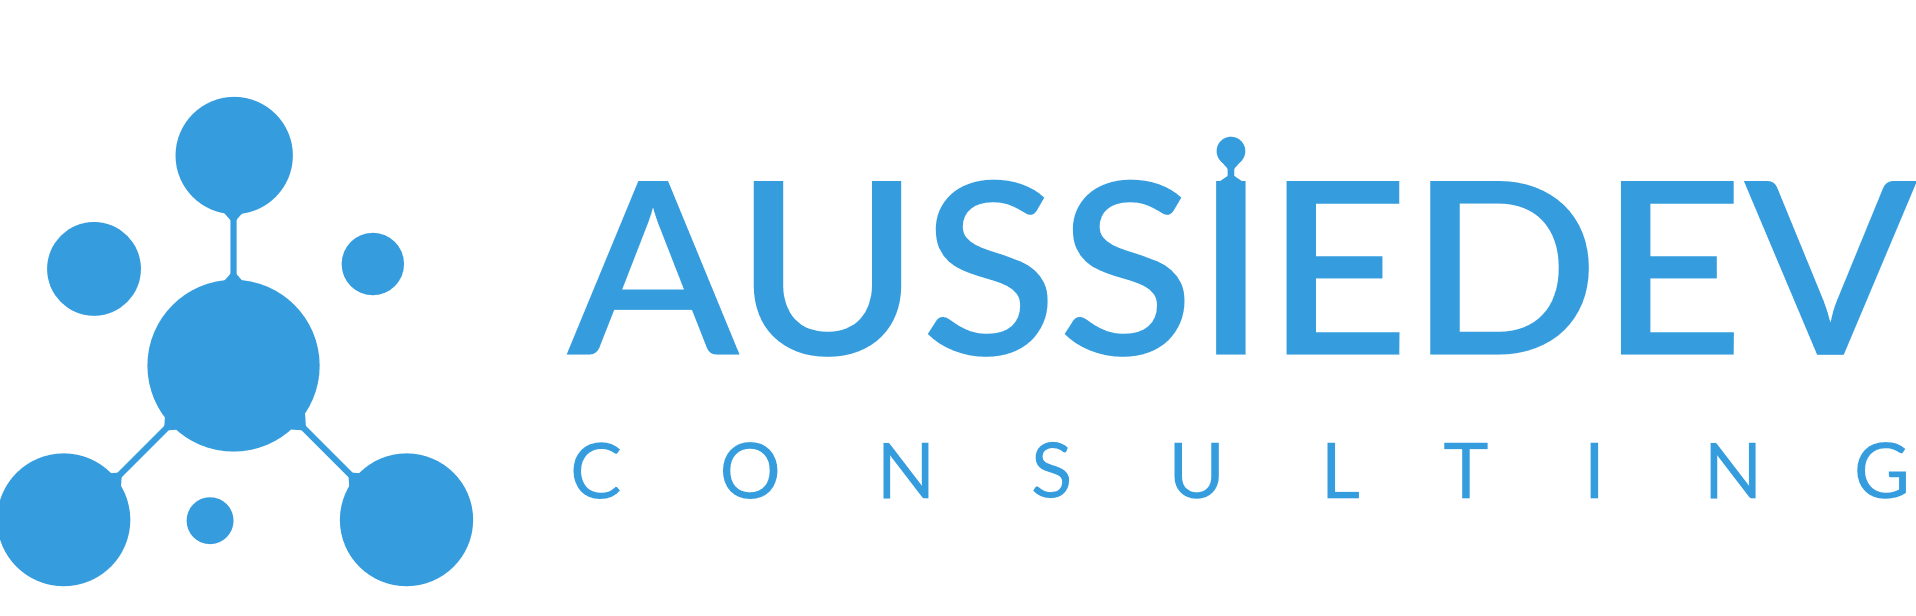 Aussiedev Consulting profile on Qualified.One